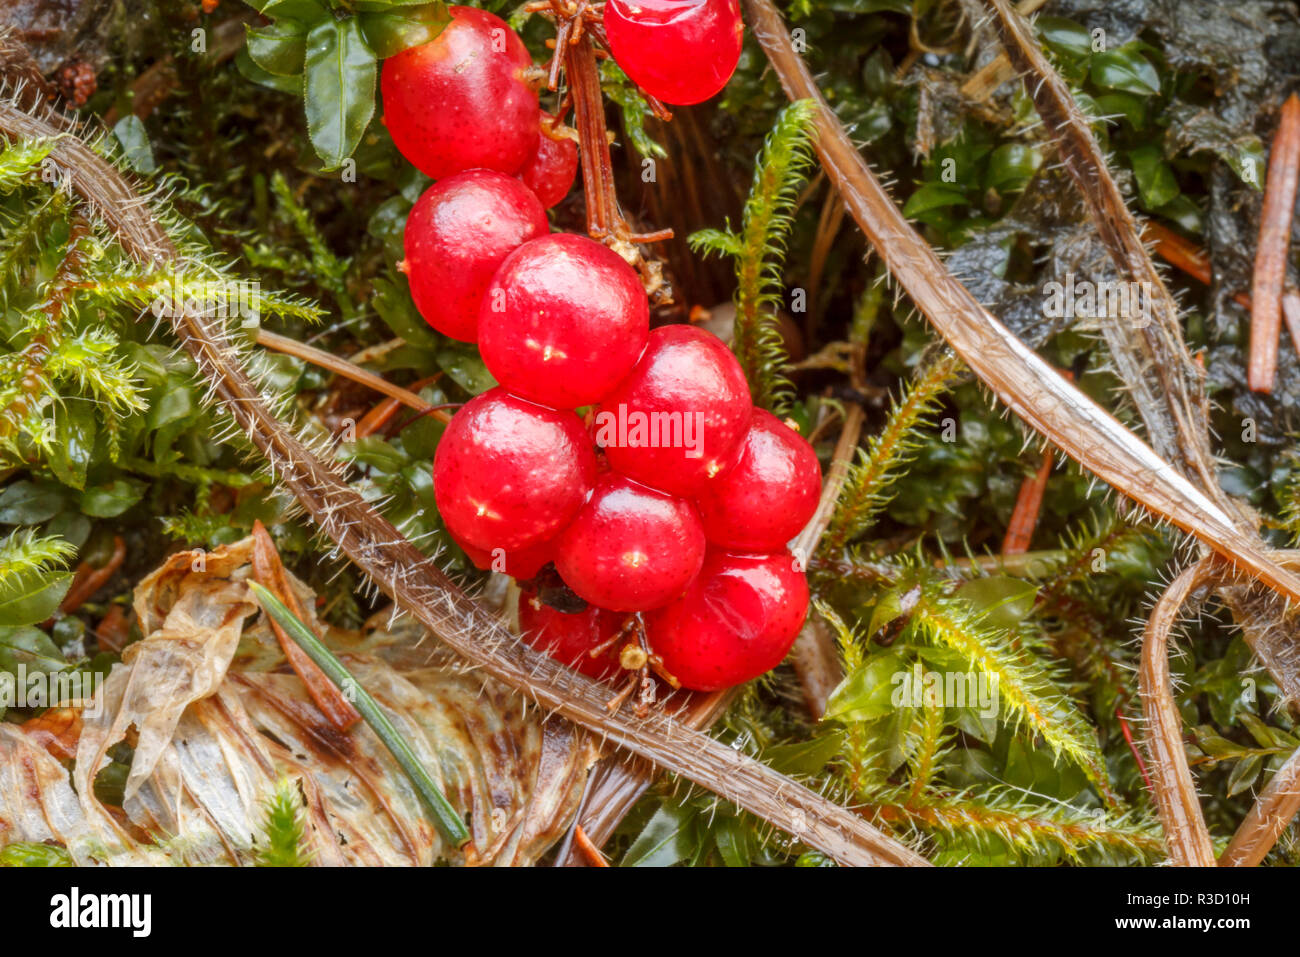 USA, Alaska. Red berries against moss on the forest floor. Stock Photo